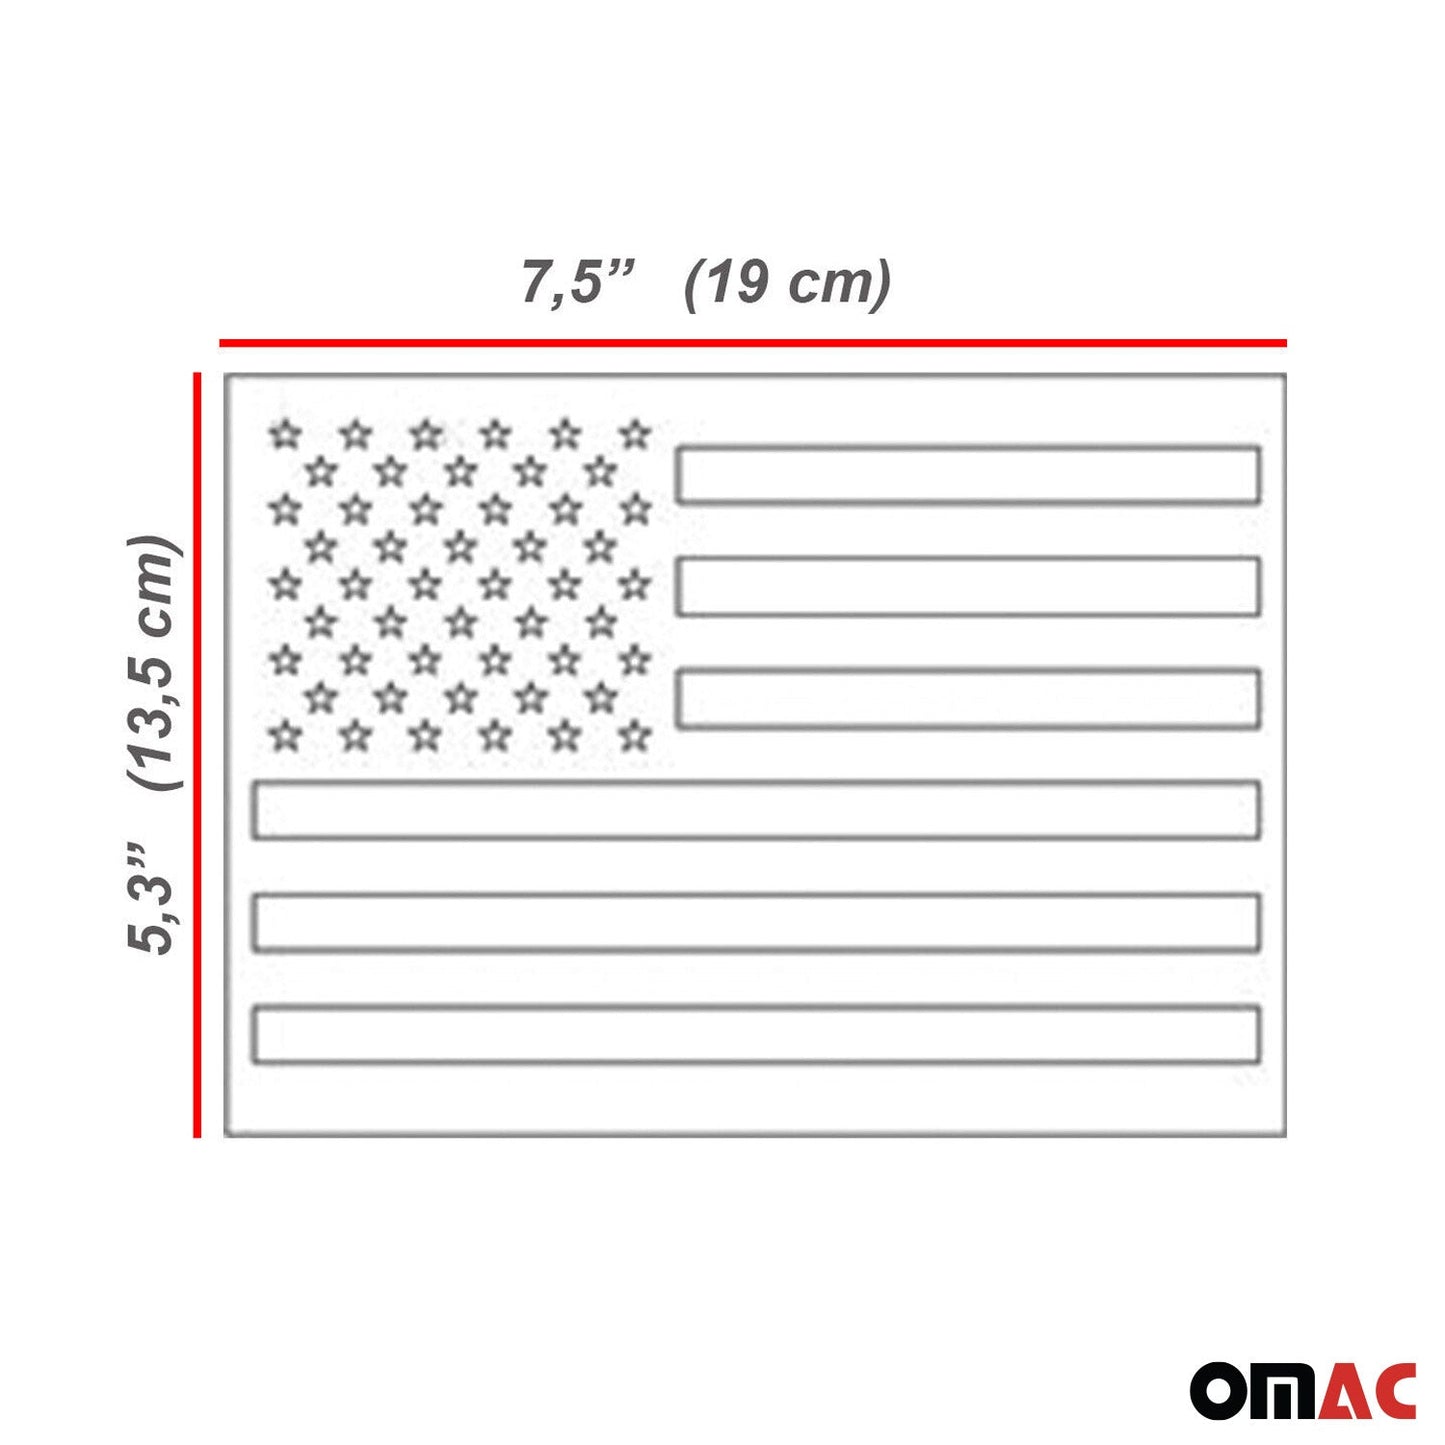 OMAC 2 Pcs US American Flag for Hummer Brushed Chrome Decal Sticker Stainless Steel U022198